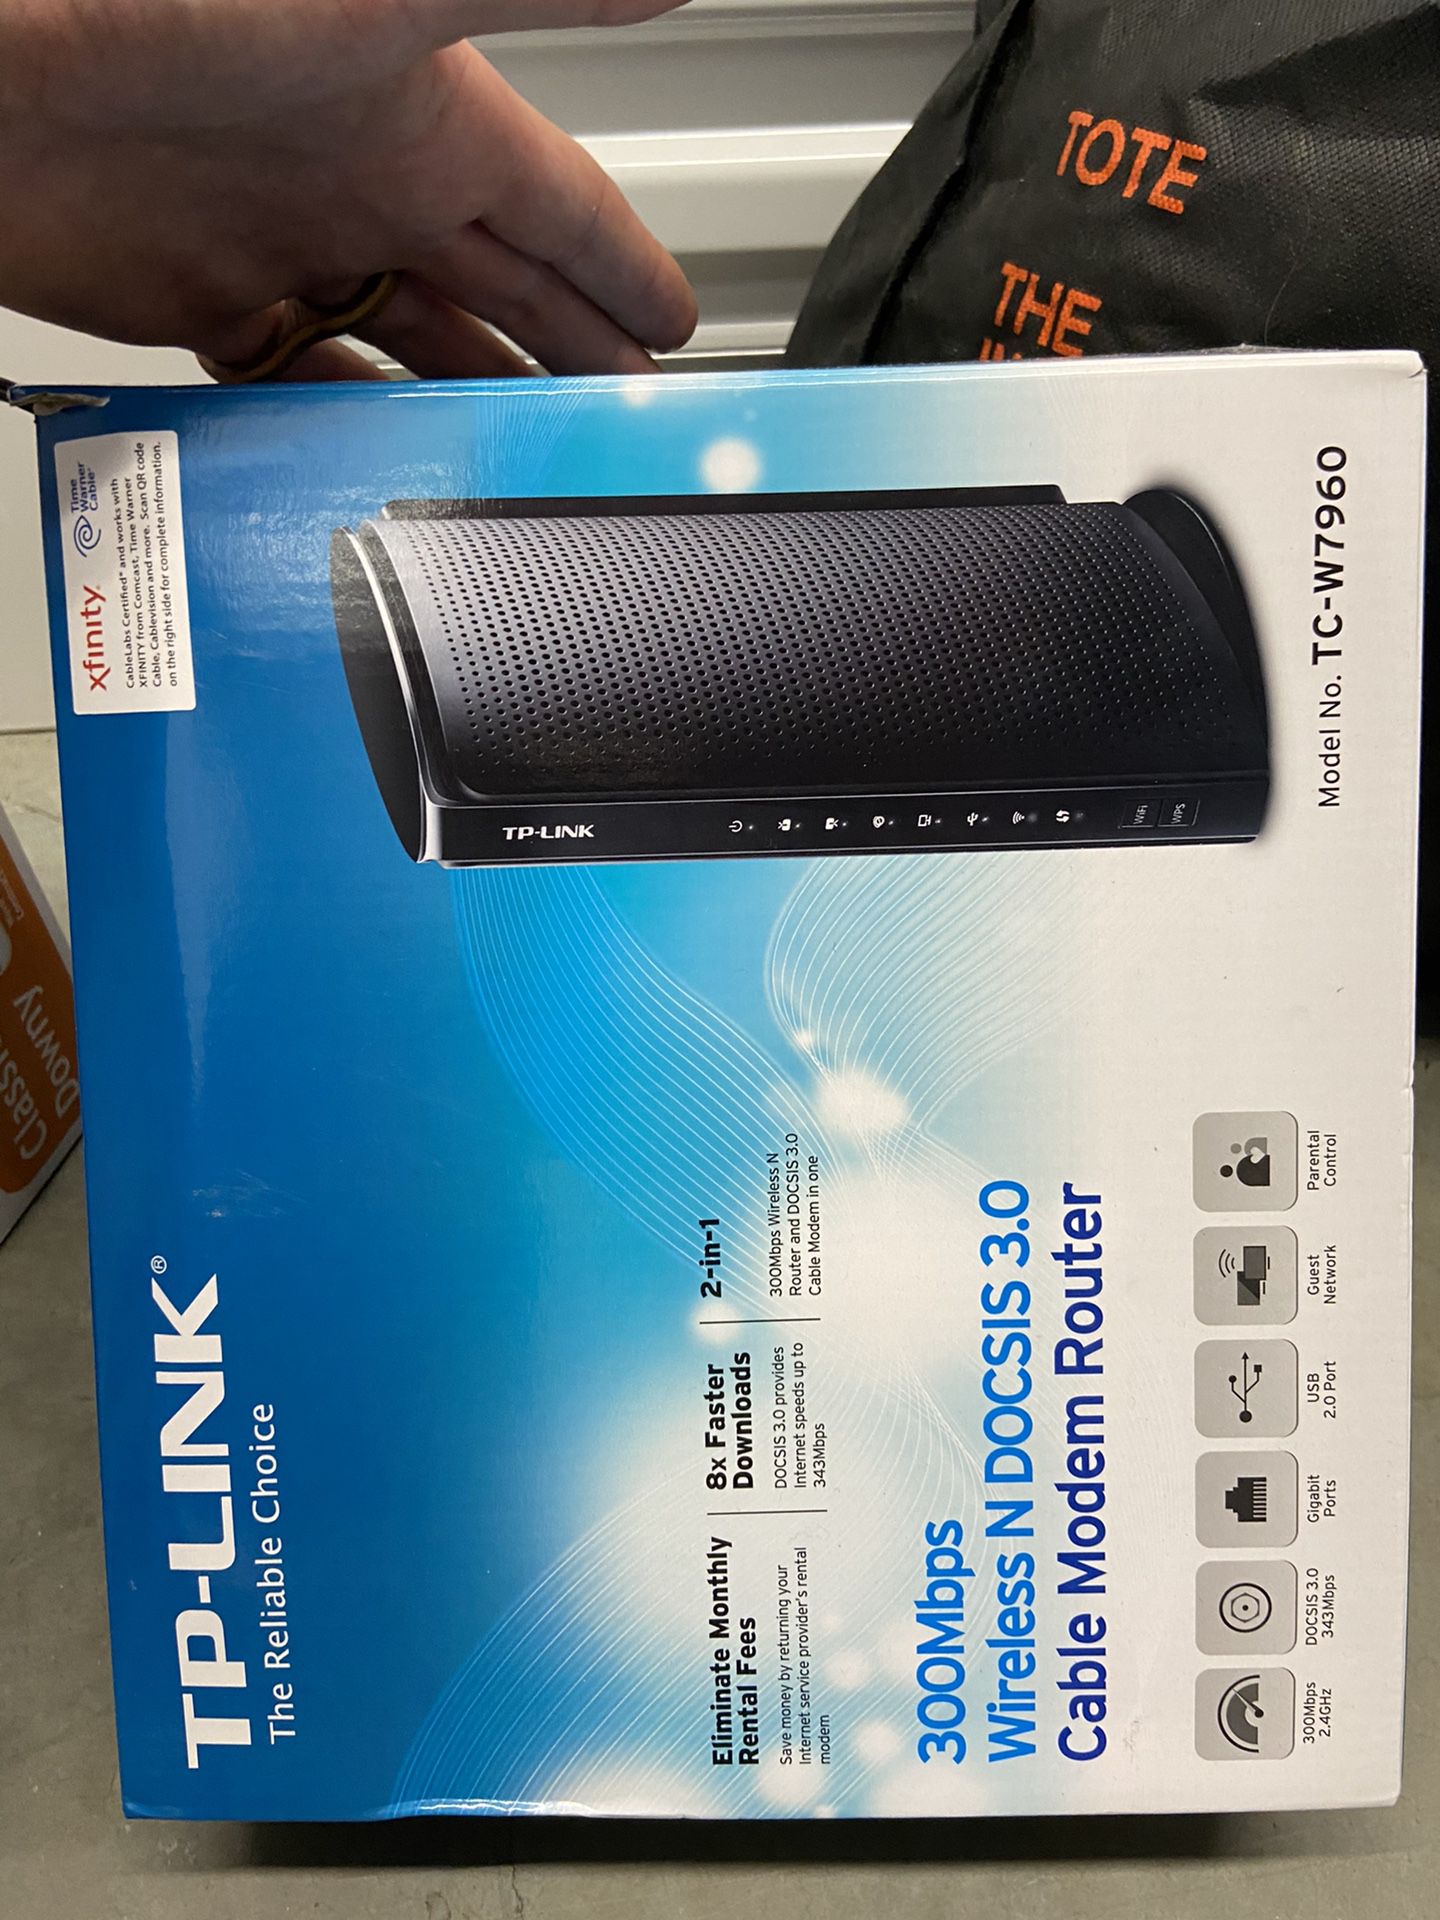 Cable modem and router works for Comcast